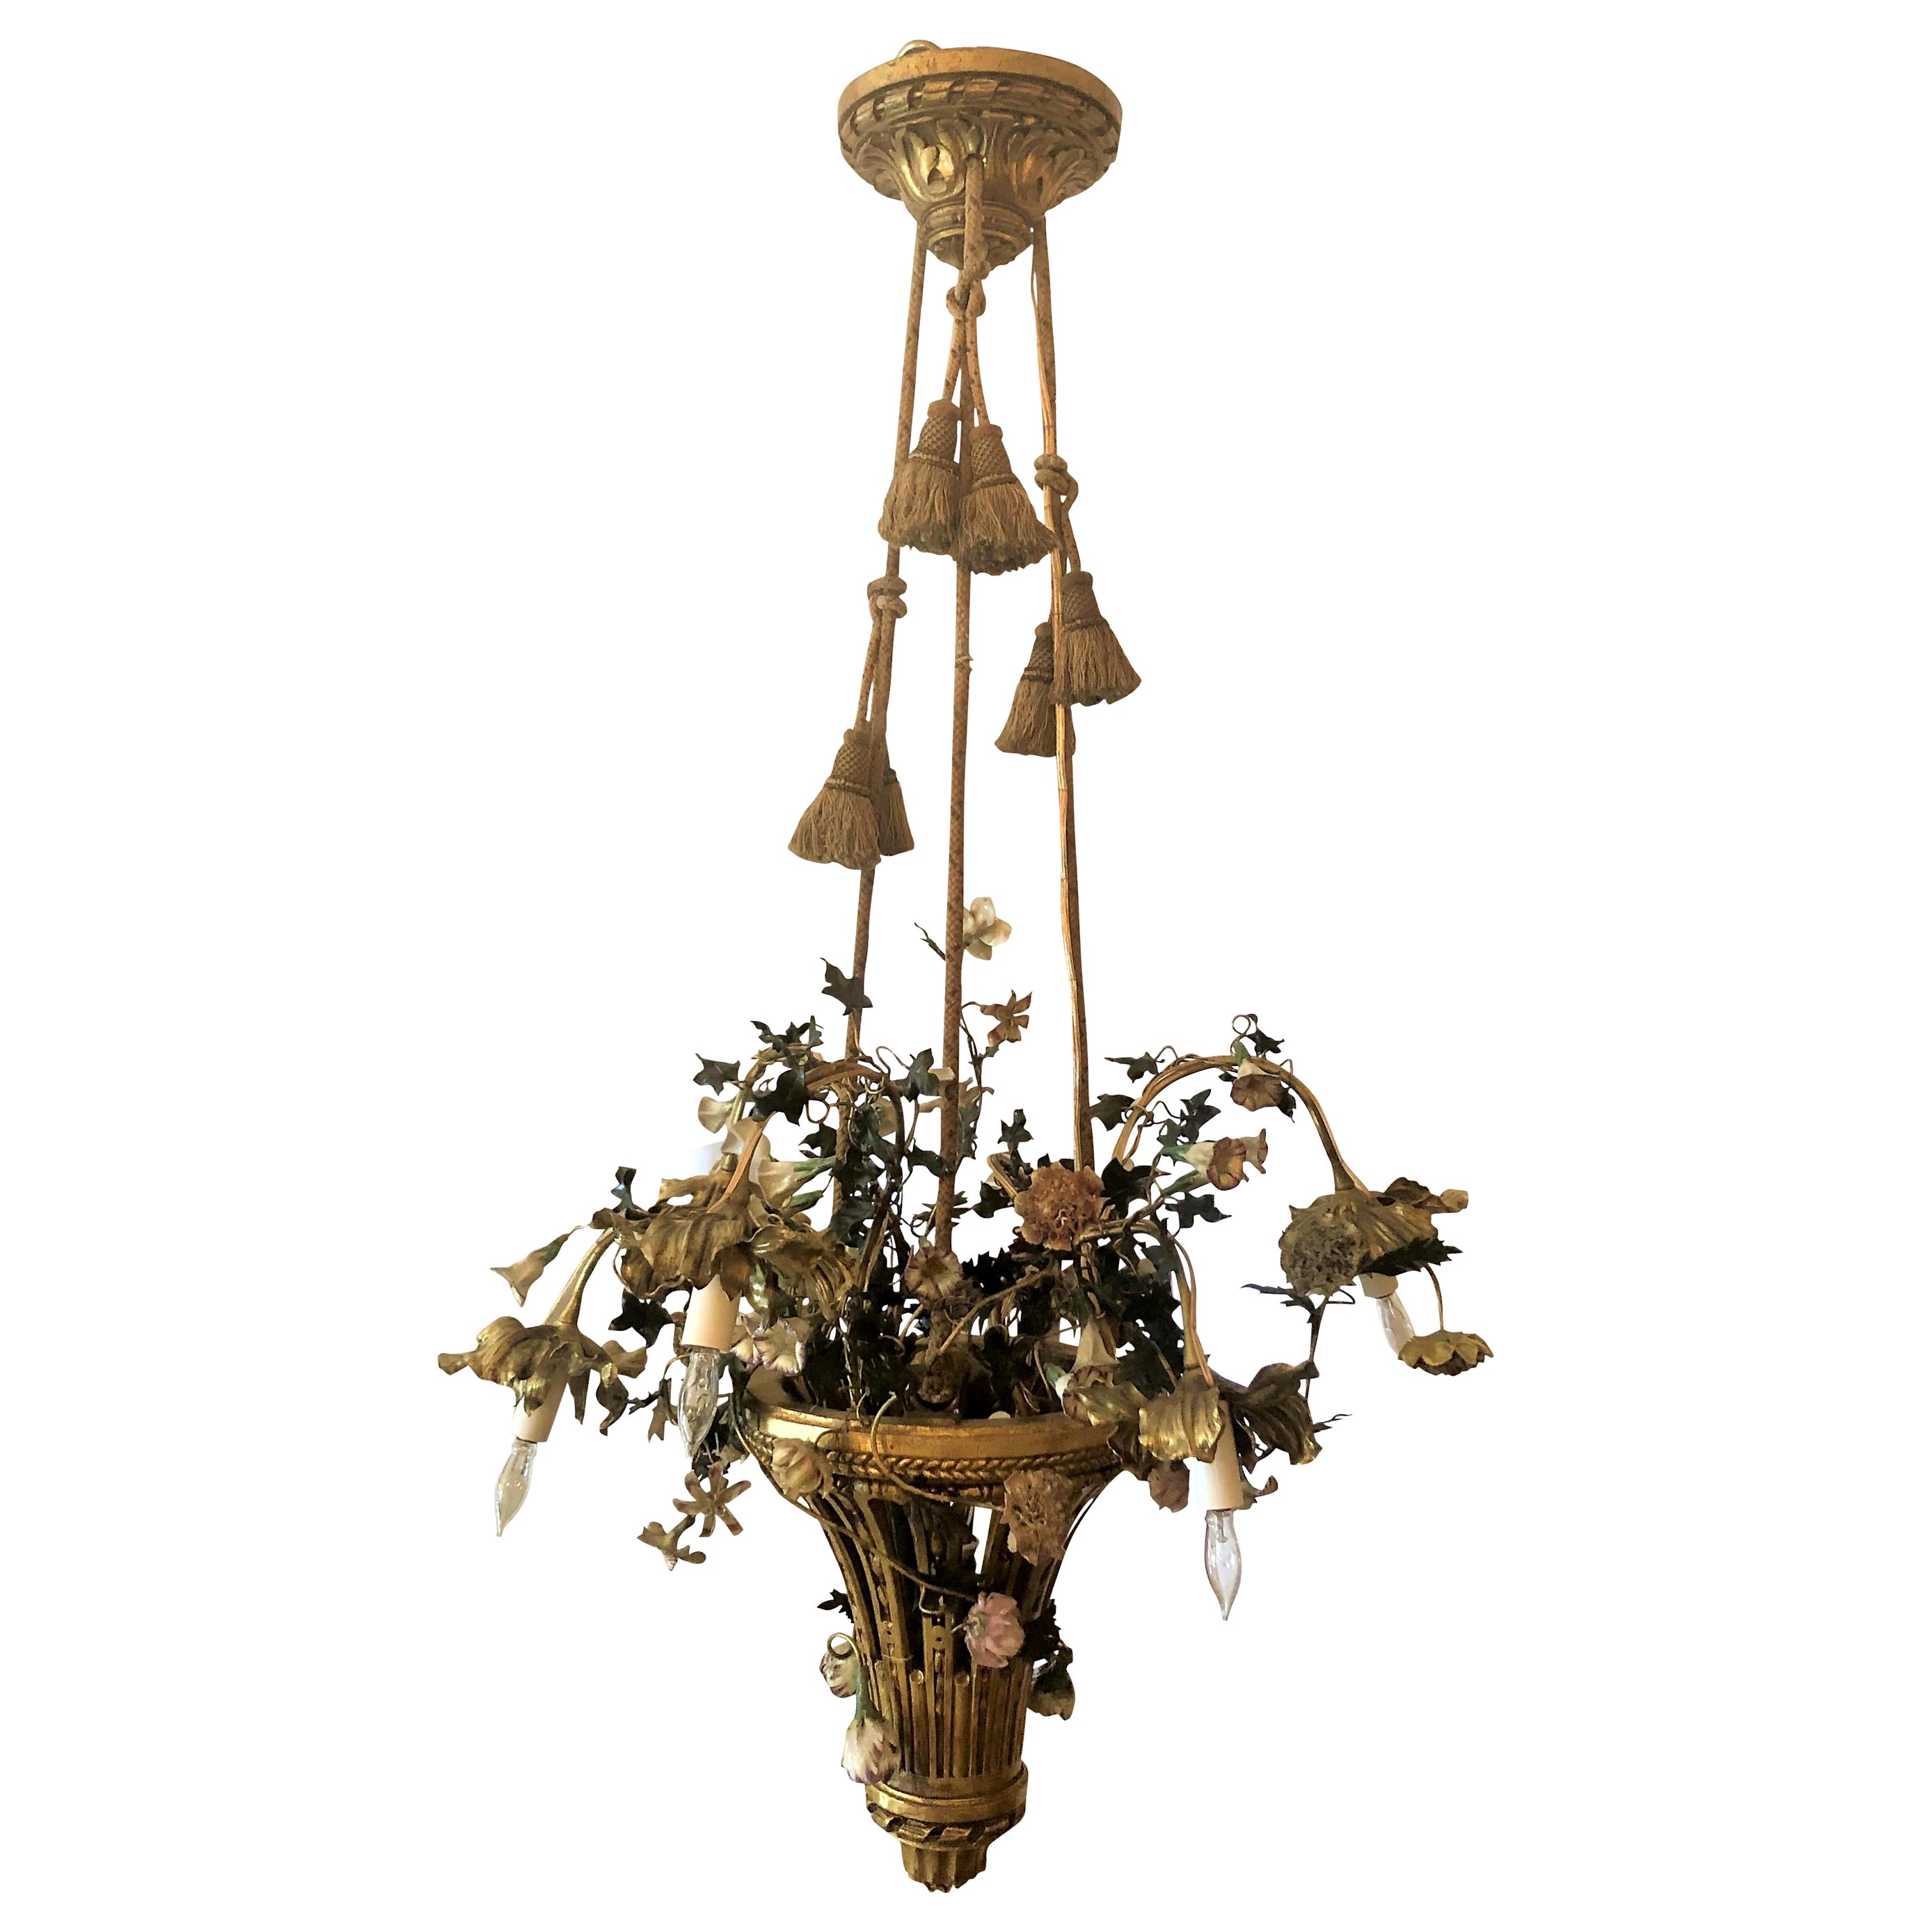 Unusual Antique Mid 19th Century French "Marie Antoinette" Chandelier For Sale